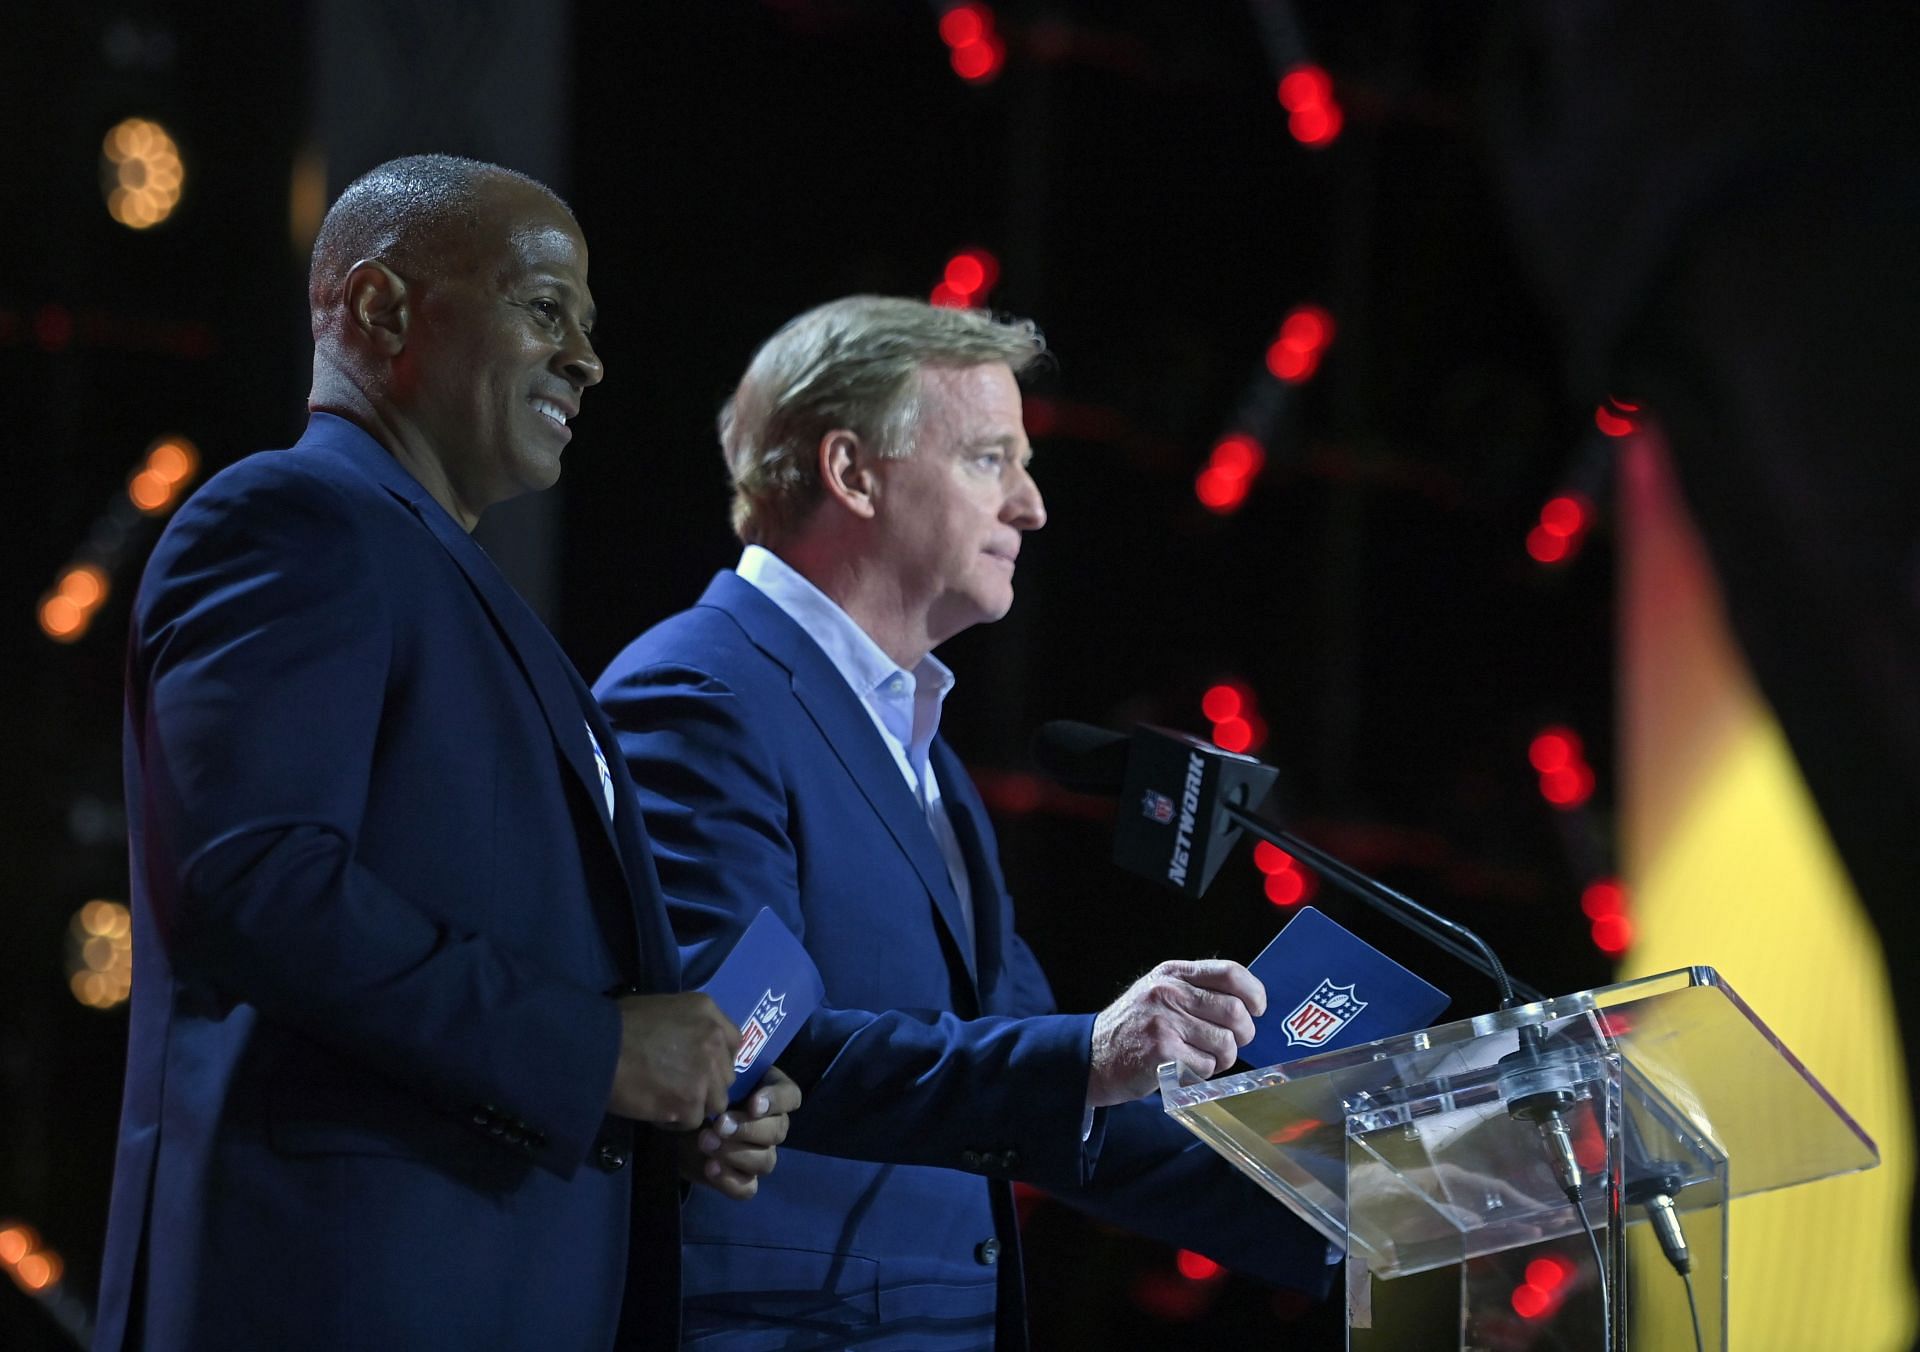 Commissioner Roget Goodell takes the podium in the 2022 draft